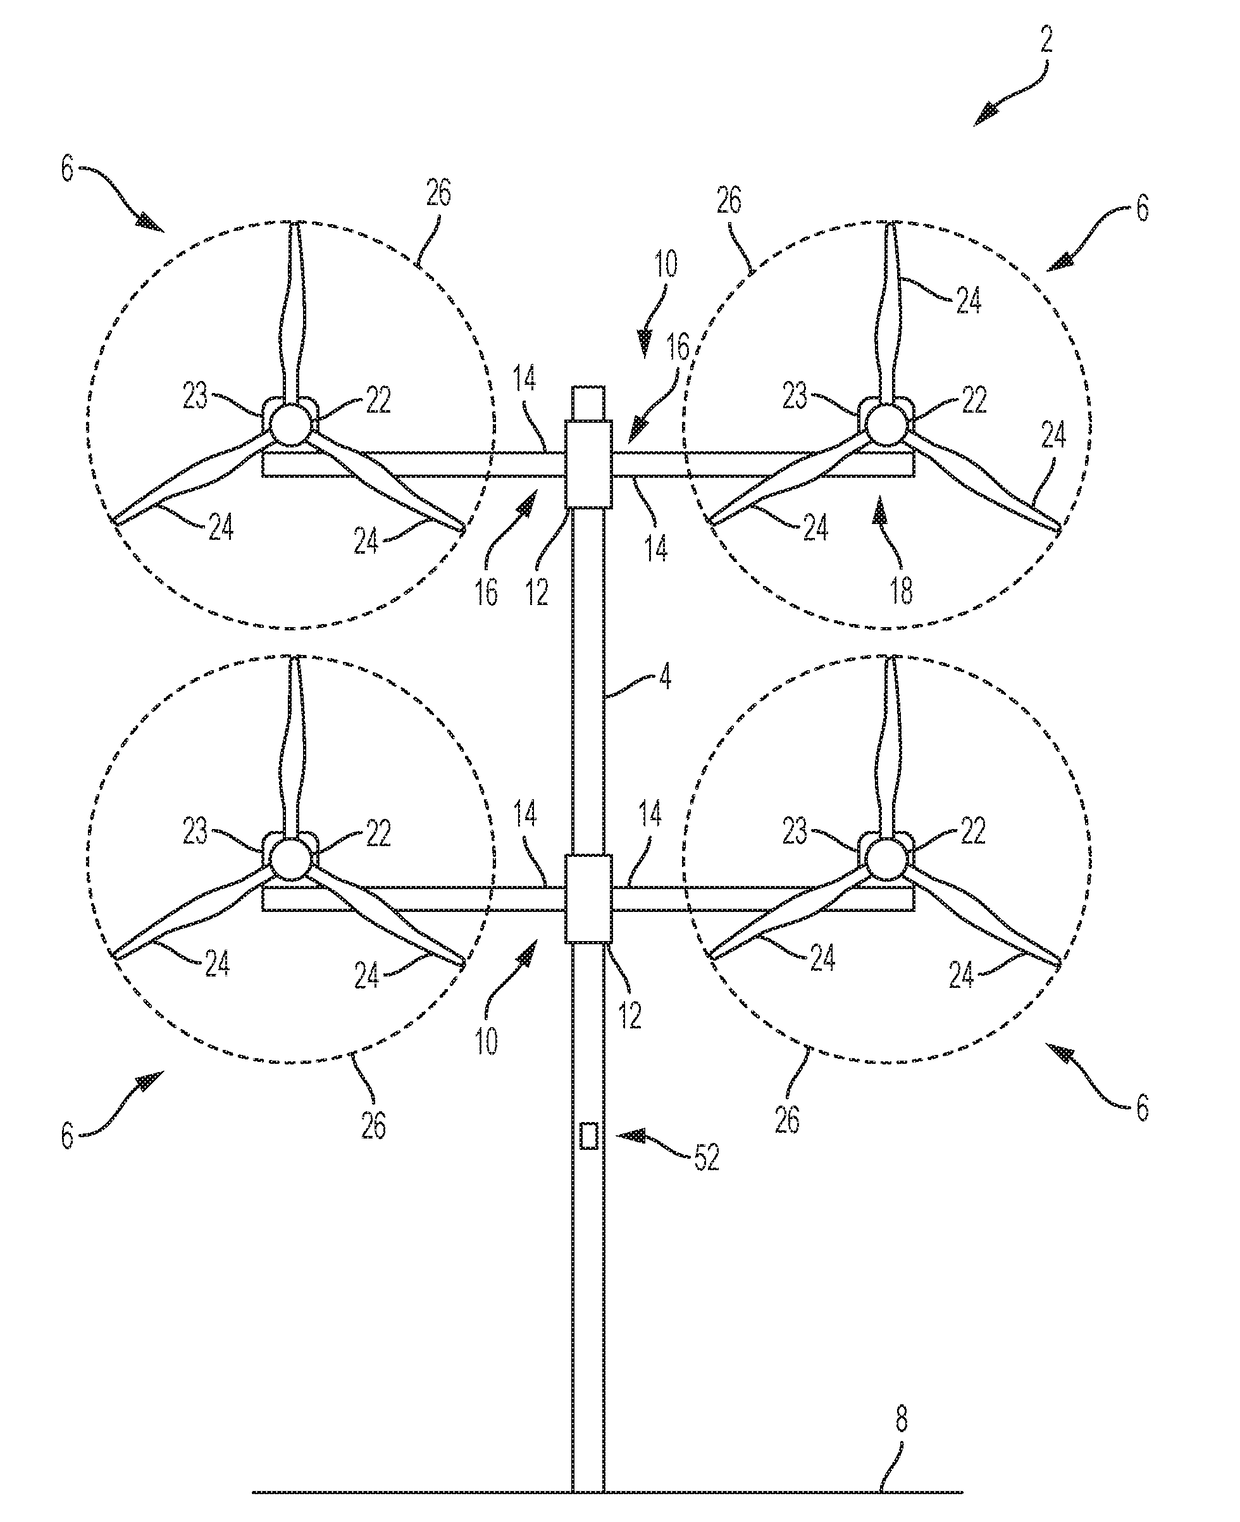 Control system for damping structural vibrations of a wind turbine system having multiple rotors